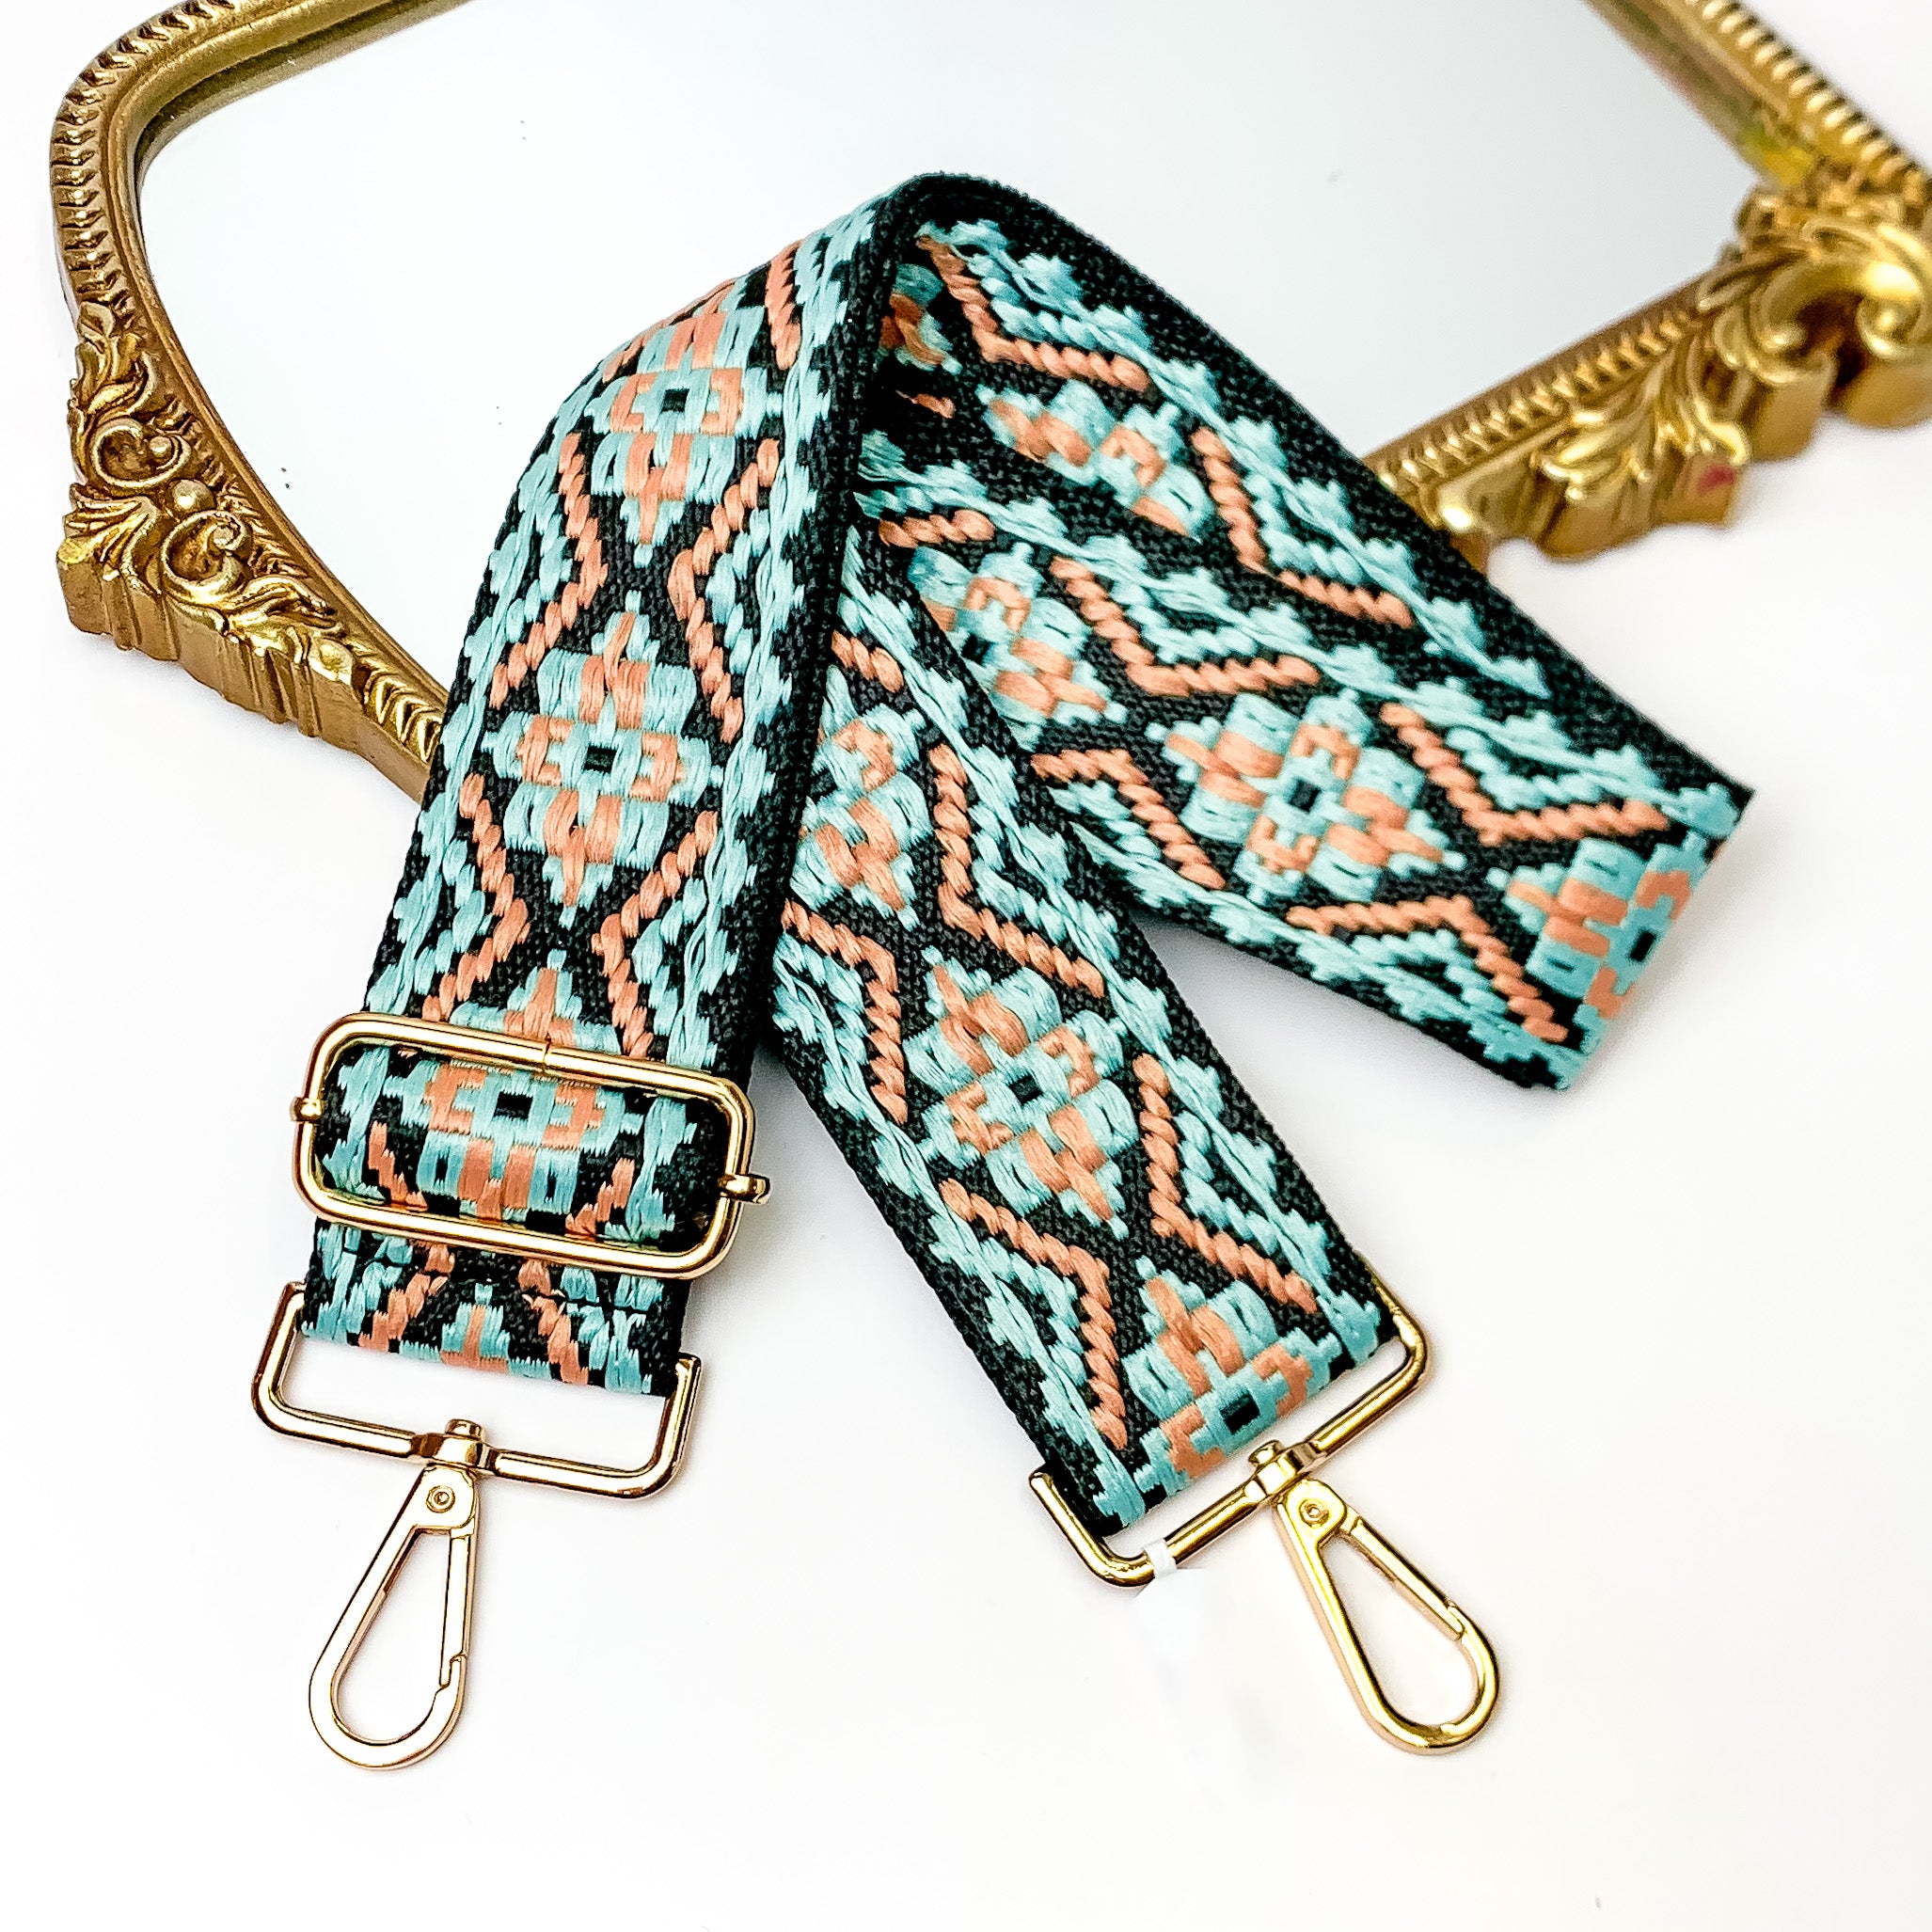 Black canvas purse strap with turquoise and peach embroidered aztec design. This purse strap includes gold accents. This purse strap is pictured partially laying on a gold mirror on a white background.